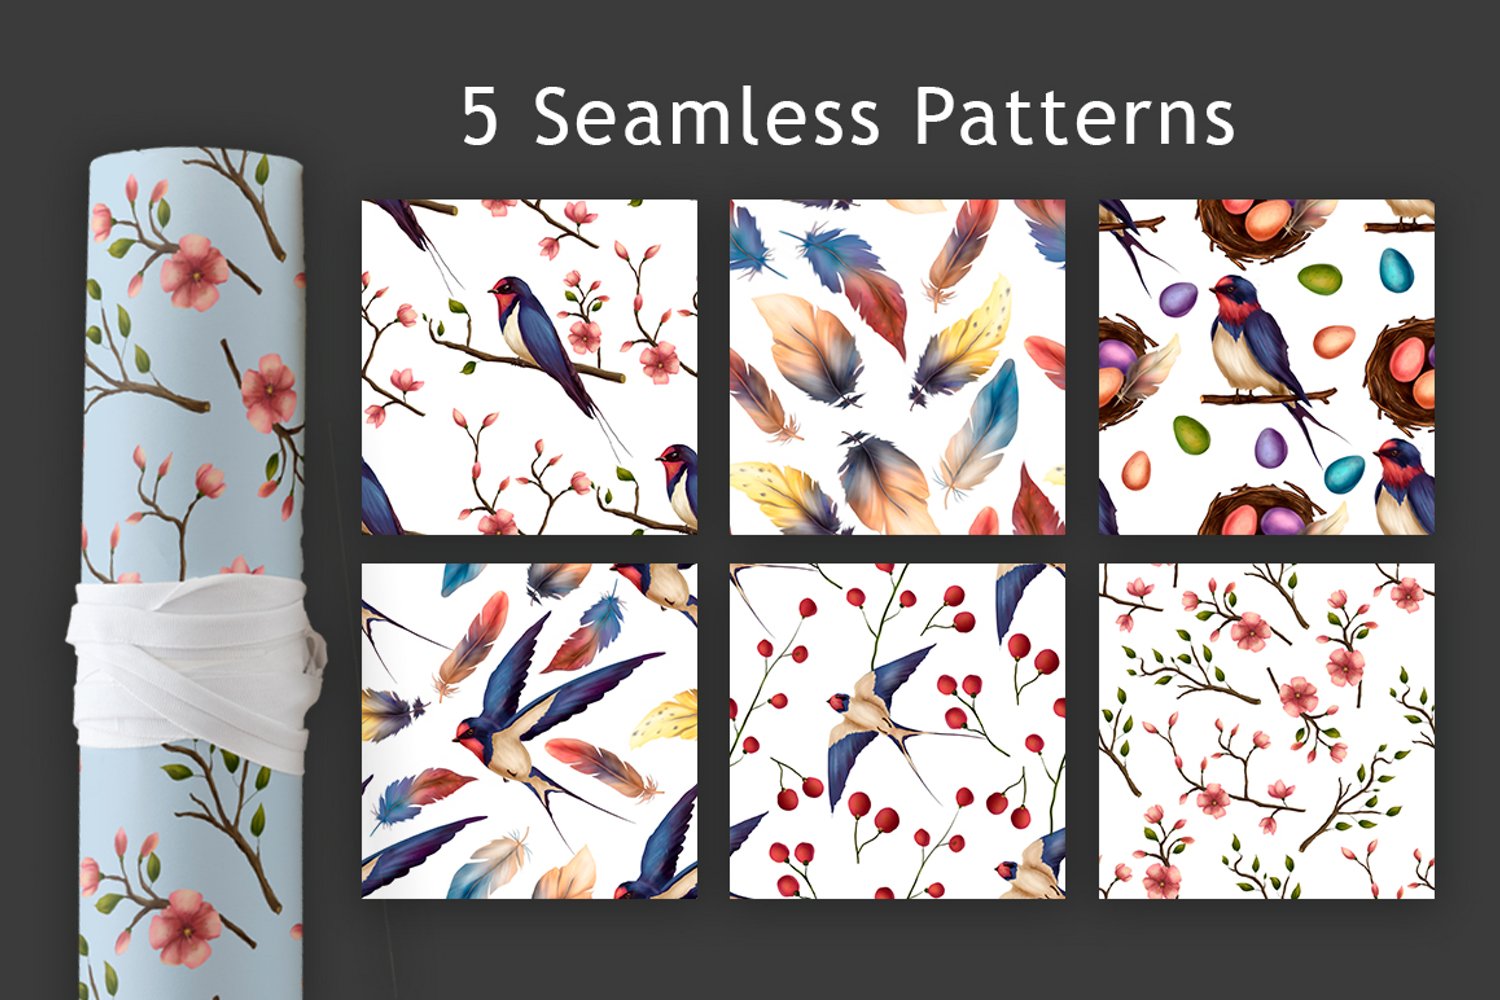 This set includes 5 seamless patterns.